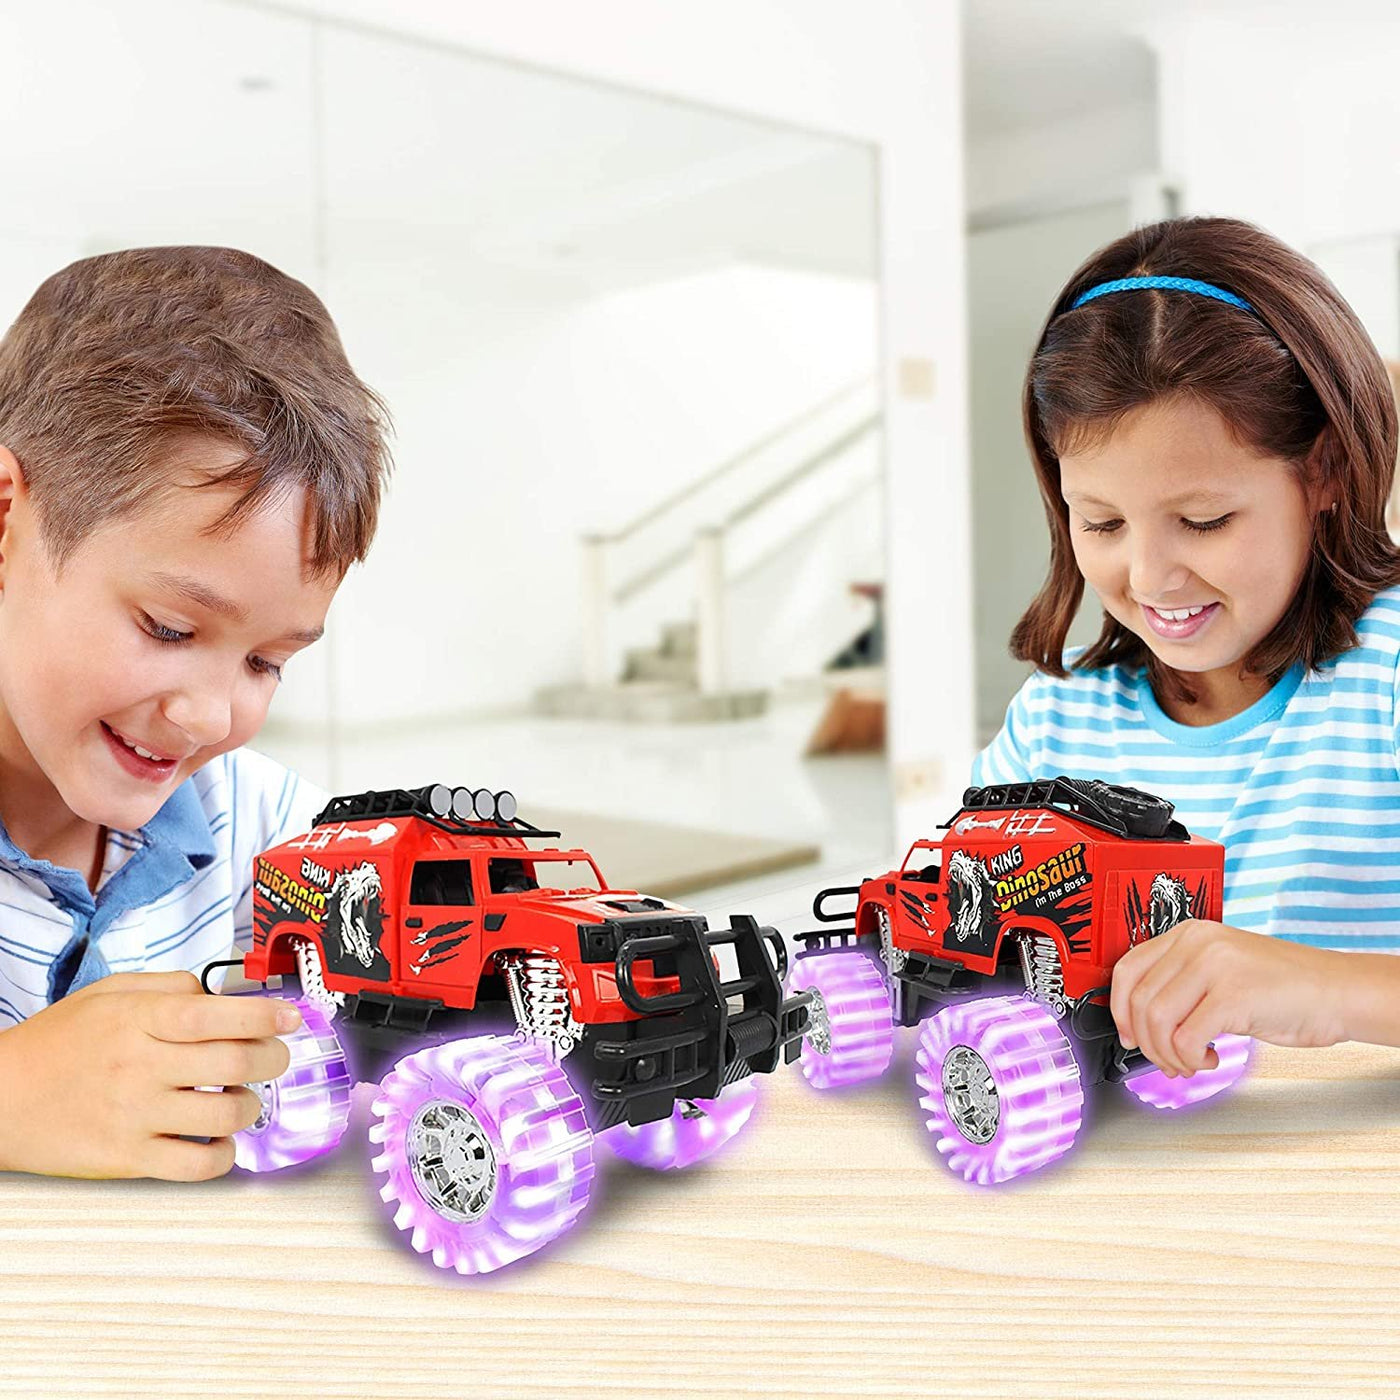 ArtCreativity Light Up Red Monster Trucks - 11 Inch Monster Truck with Beautiful Flashing LED Tires and Cool Music - Push n Go Toy Cars - Best Gift for Boys & Girls Ages 3+